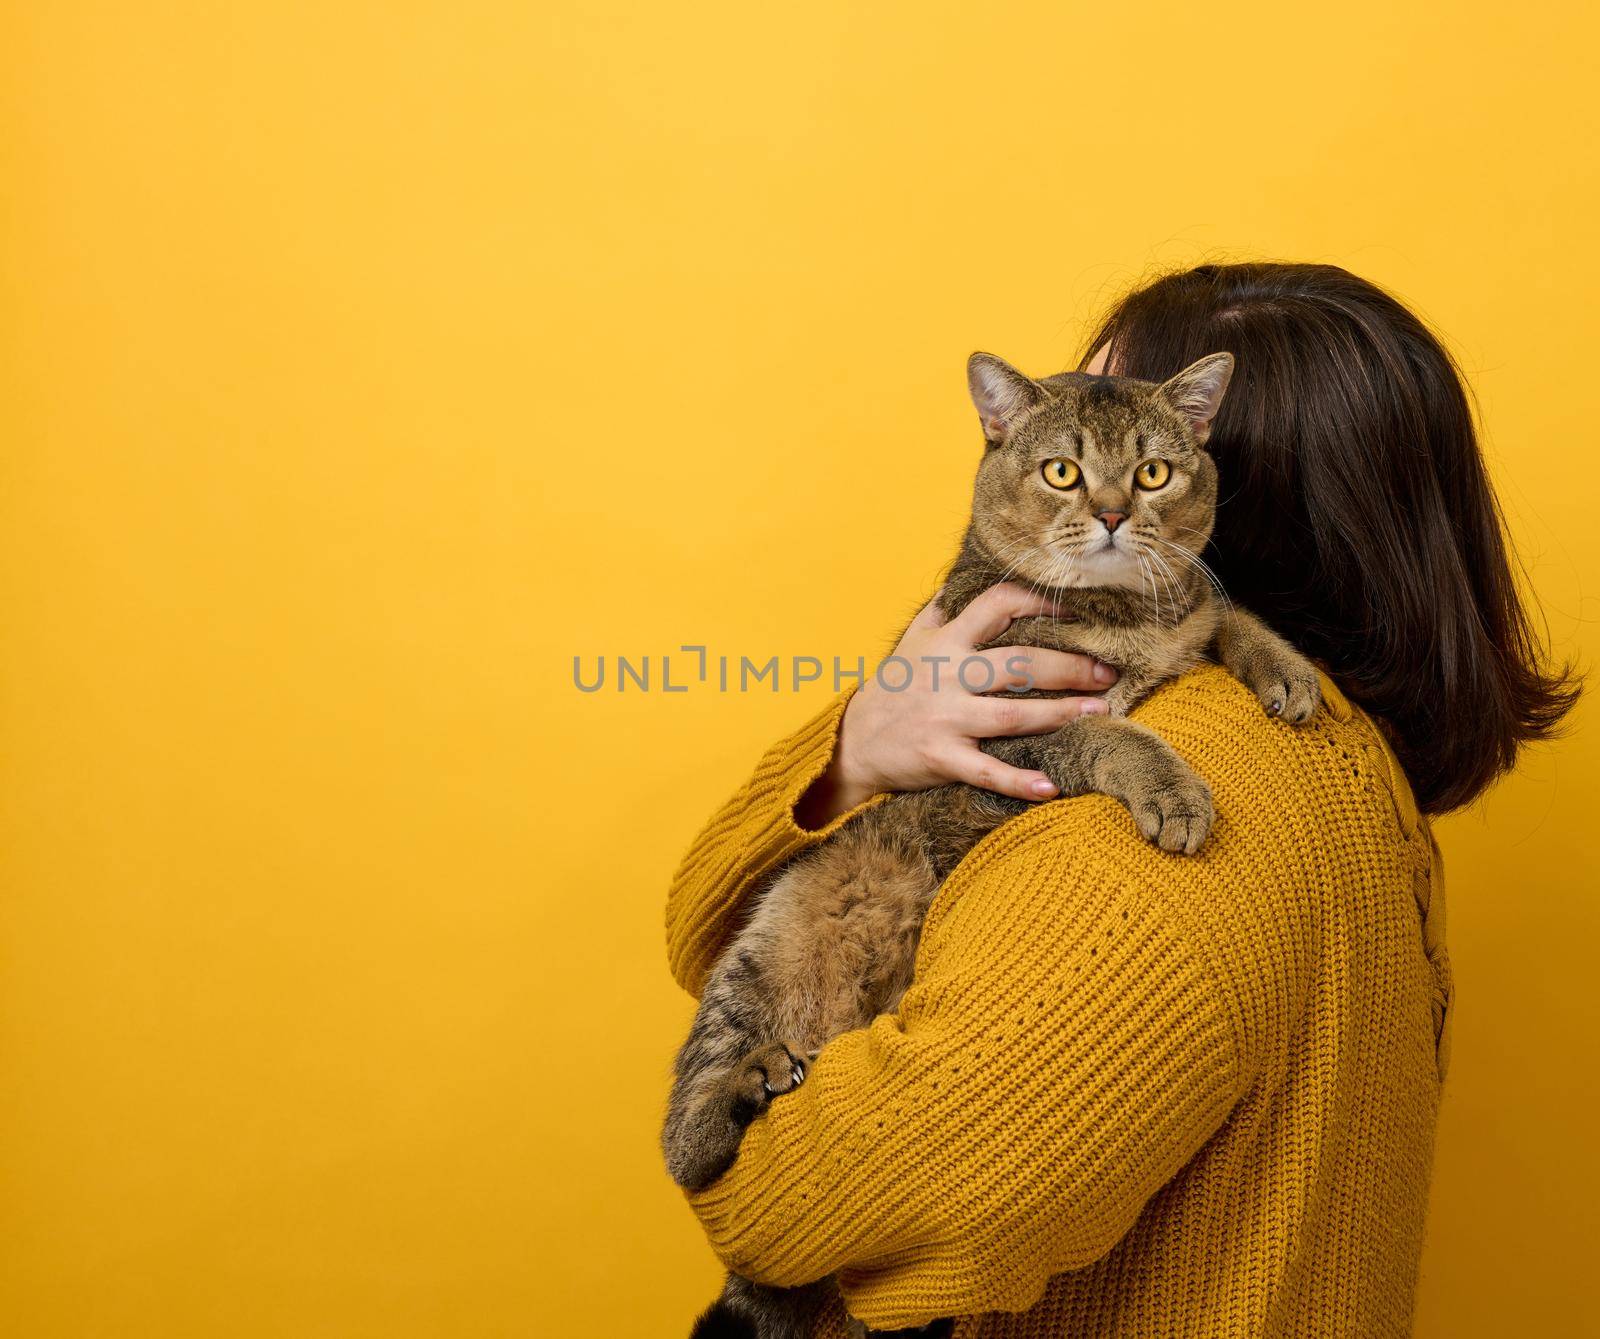 a woman in an orange sweater holds an adult Scottish Straight cat on a yellow background. Love to the animals by ndanko